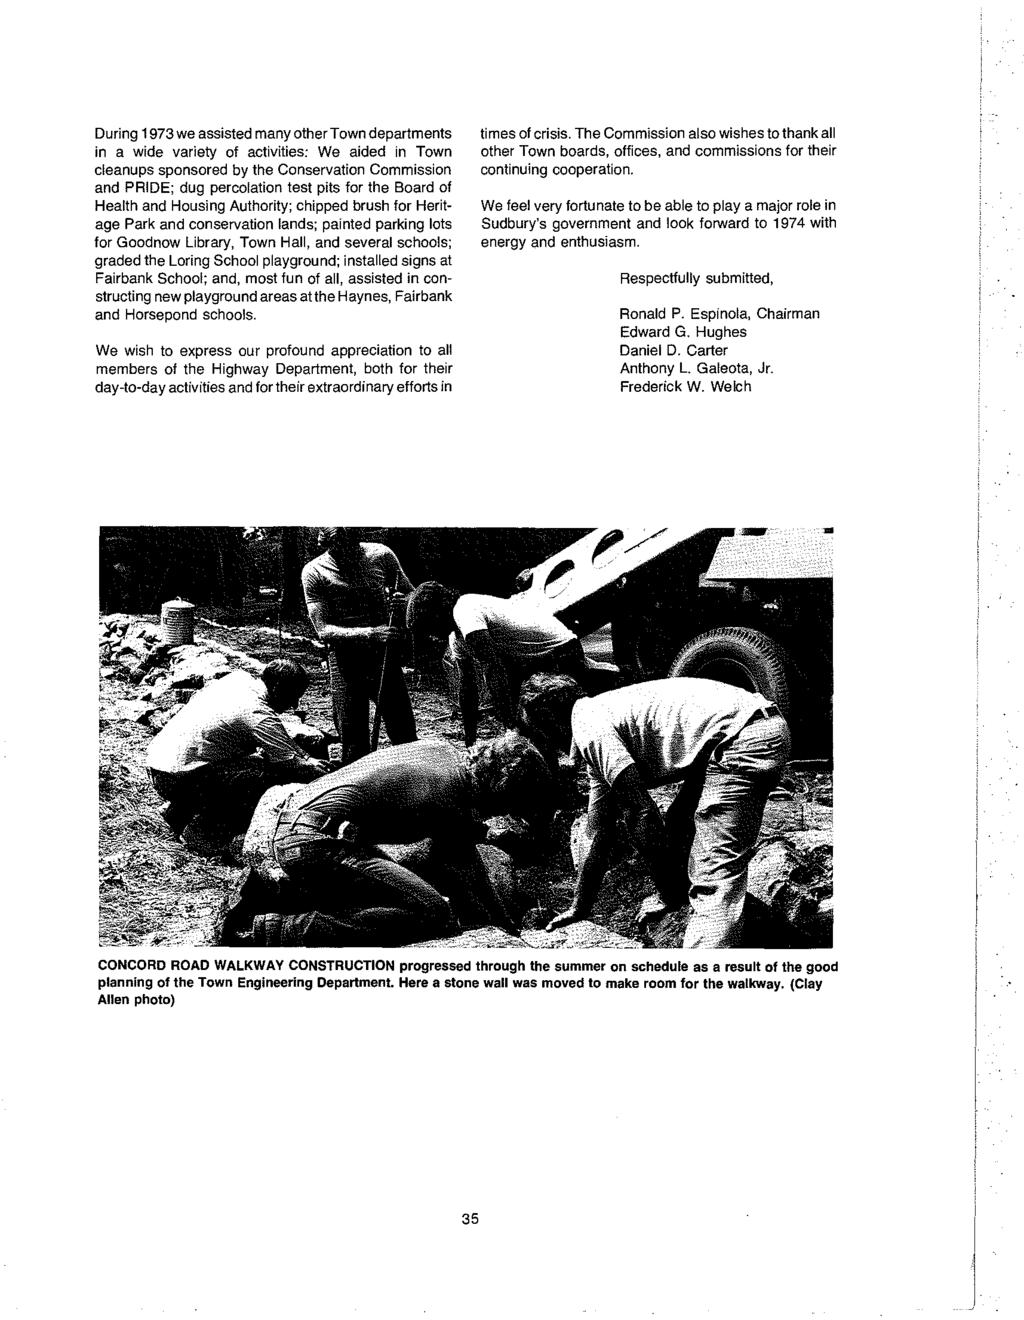 During 1973 we assisted many other Town departments in a wide variety of activities: We aided in Town cleanups sponsored by the Conservation Commission and PRIDE; dug percolation test pits for the